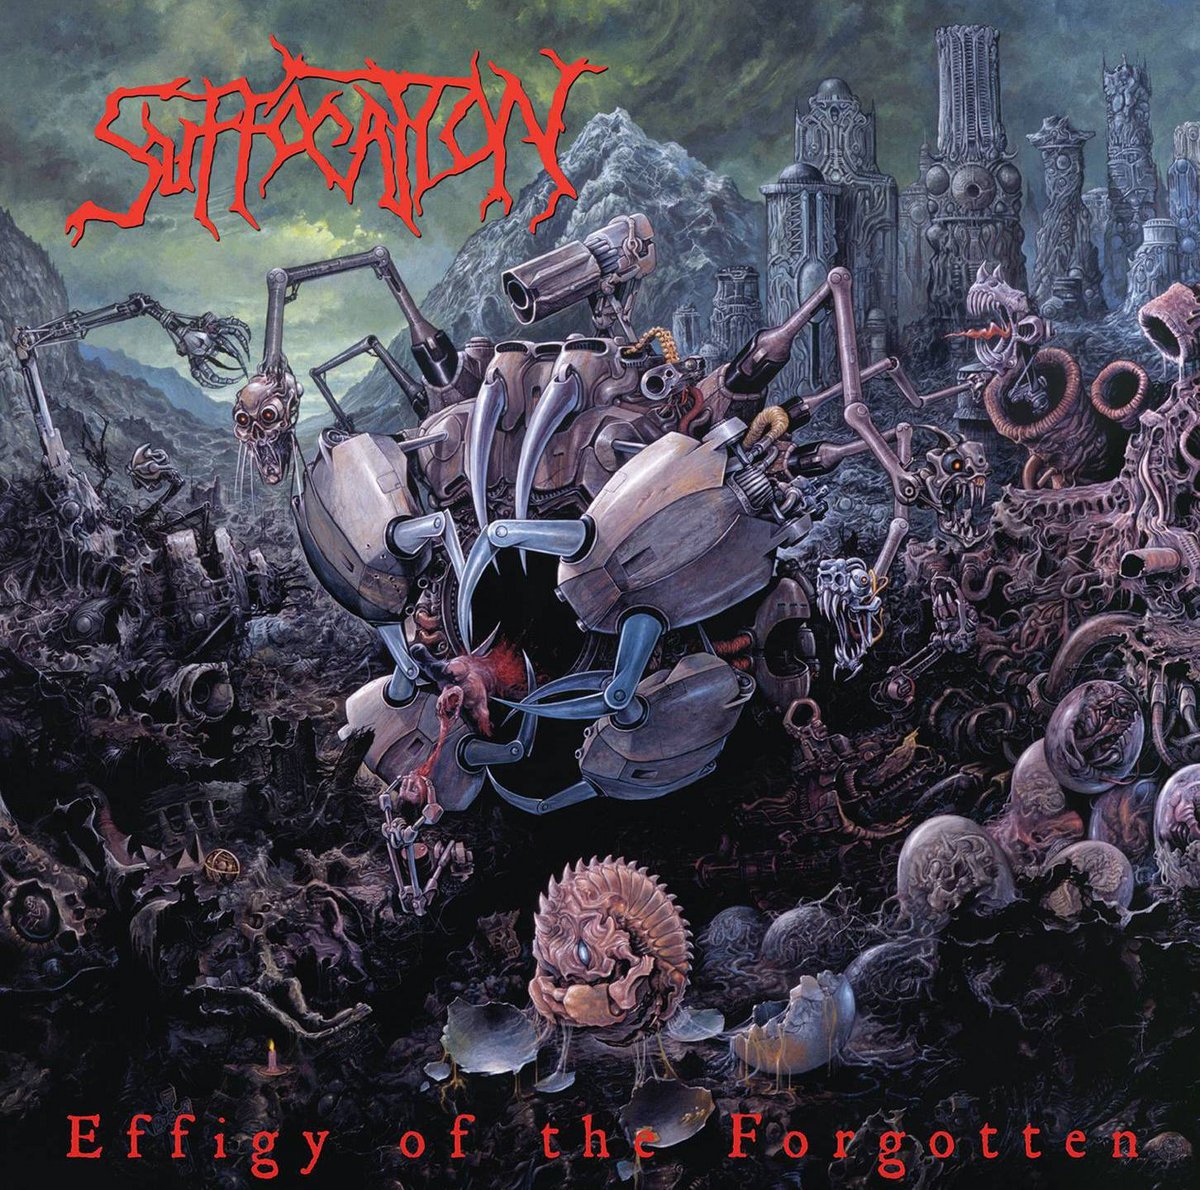 Suffocation "Effigy of the Forgotten"